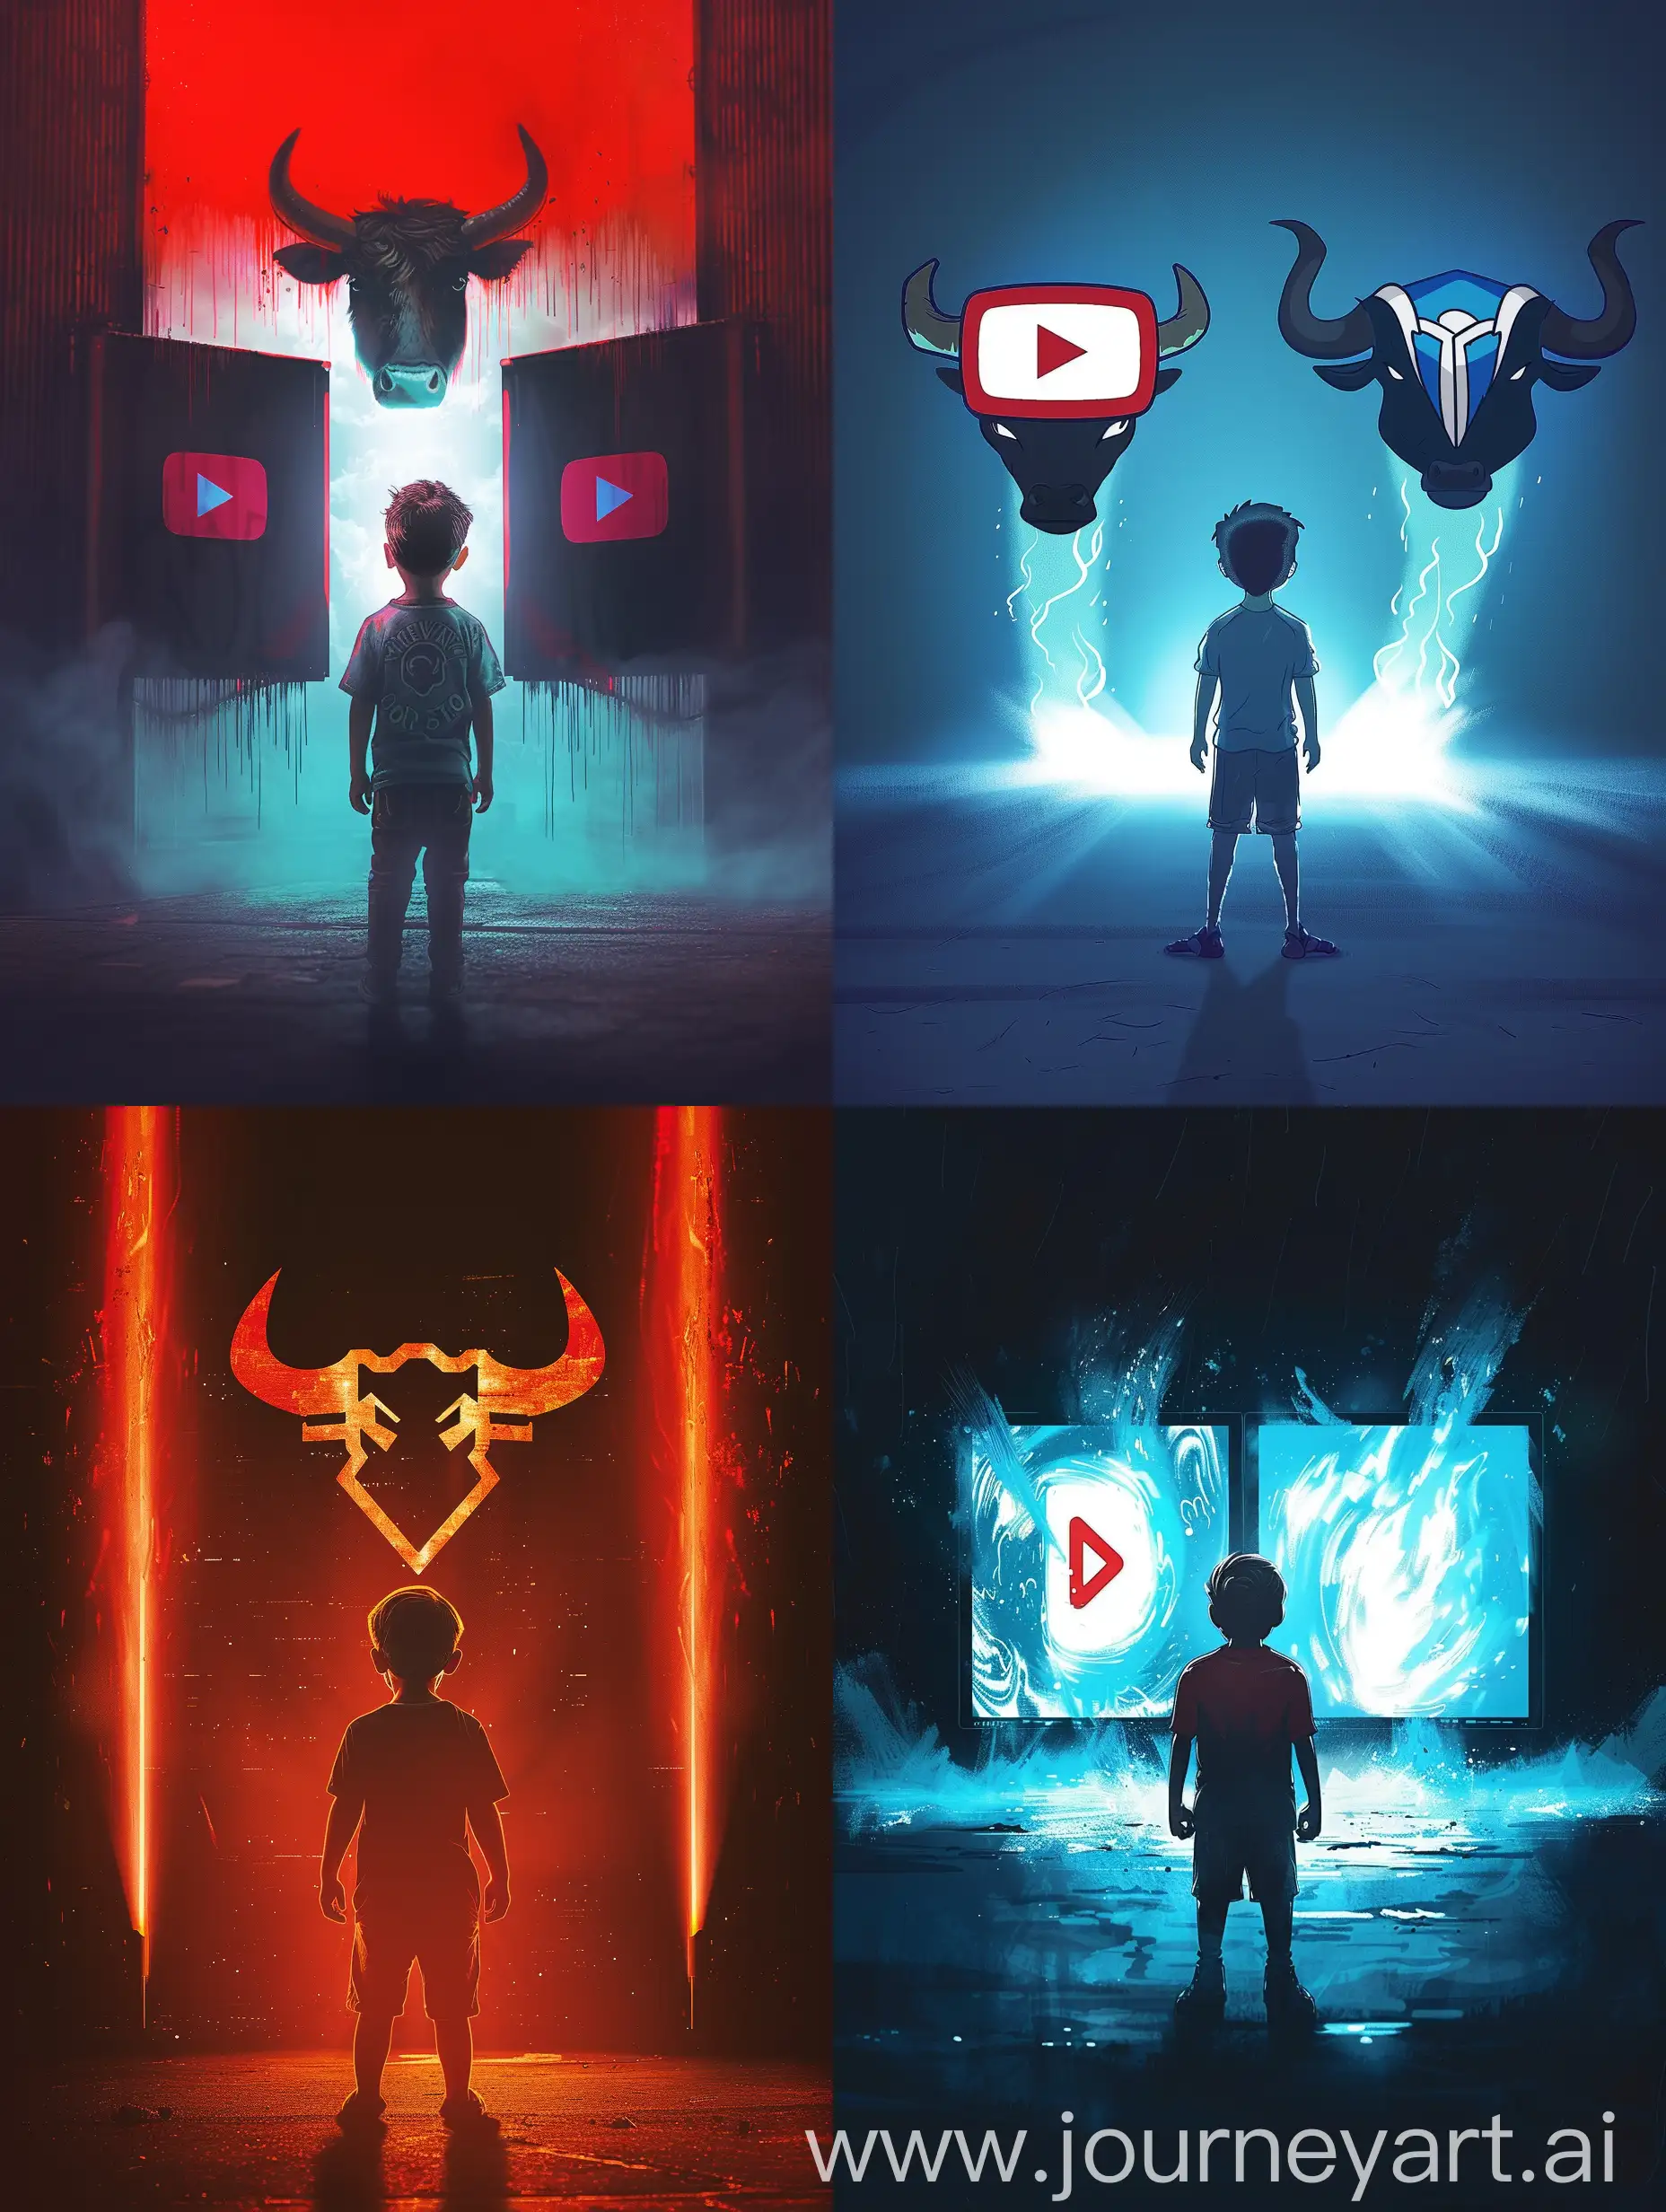 create a youtube thumbnail where A boy is standing in front of the two and two logos are coming out rapidly like a bullate behind the boy.